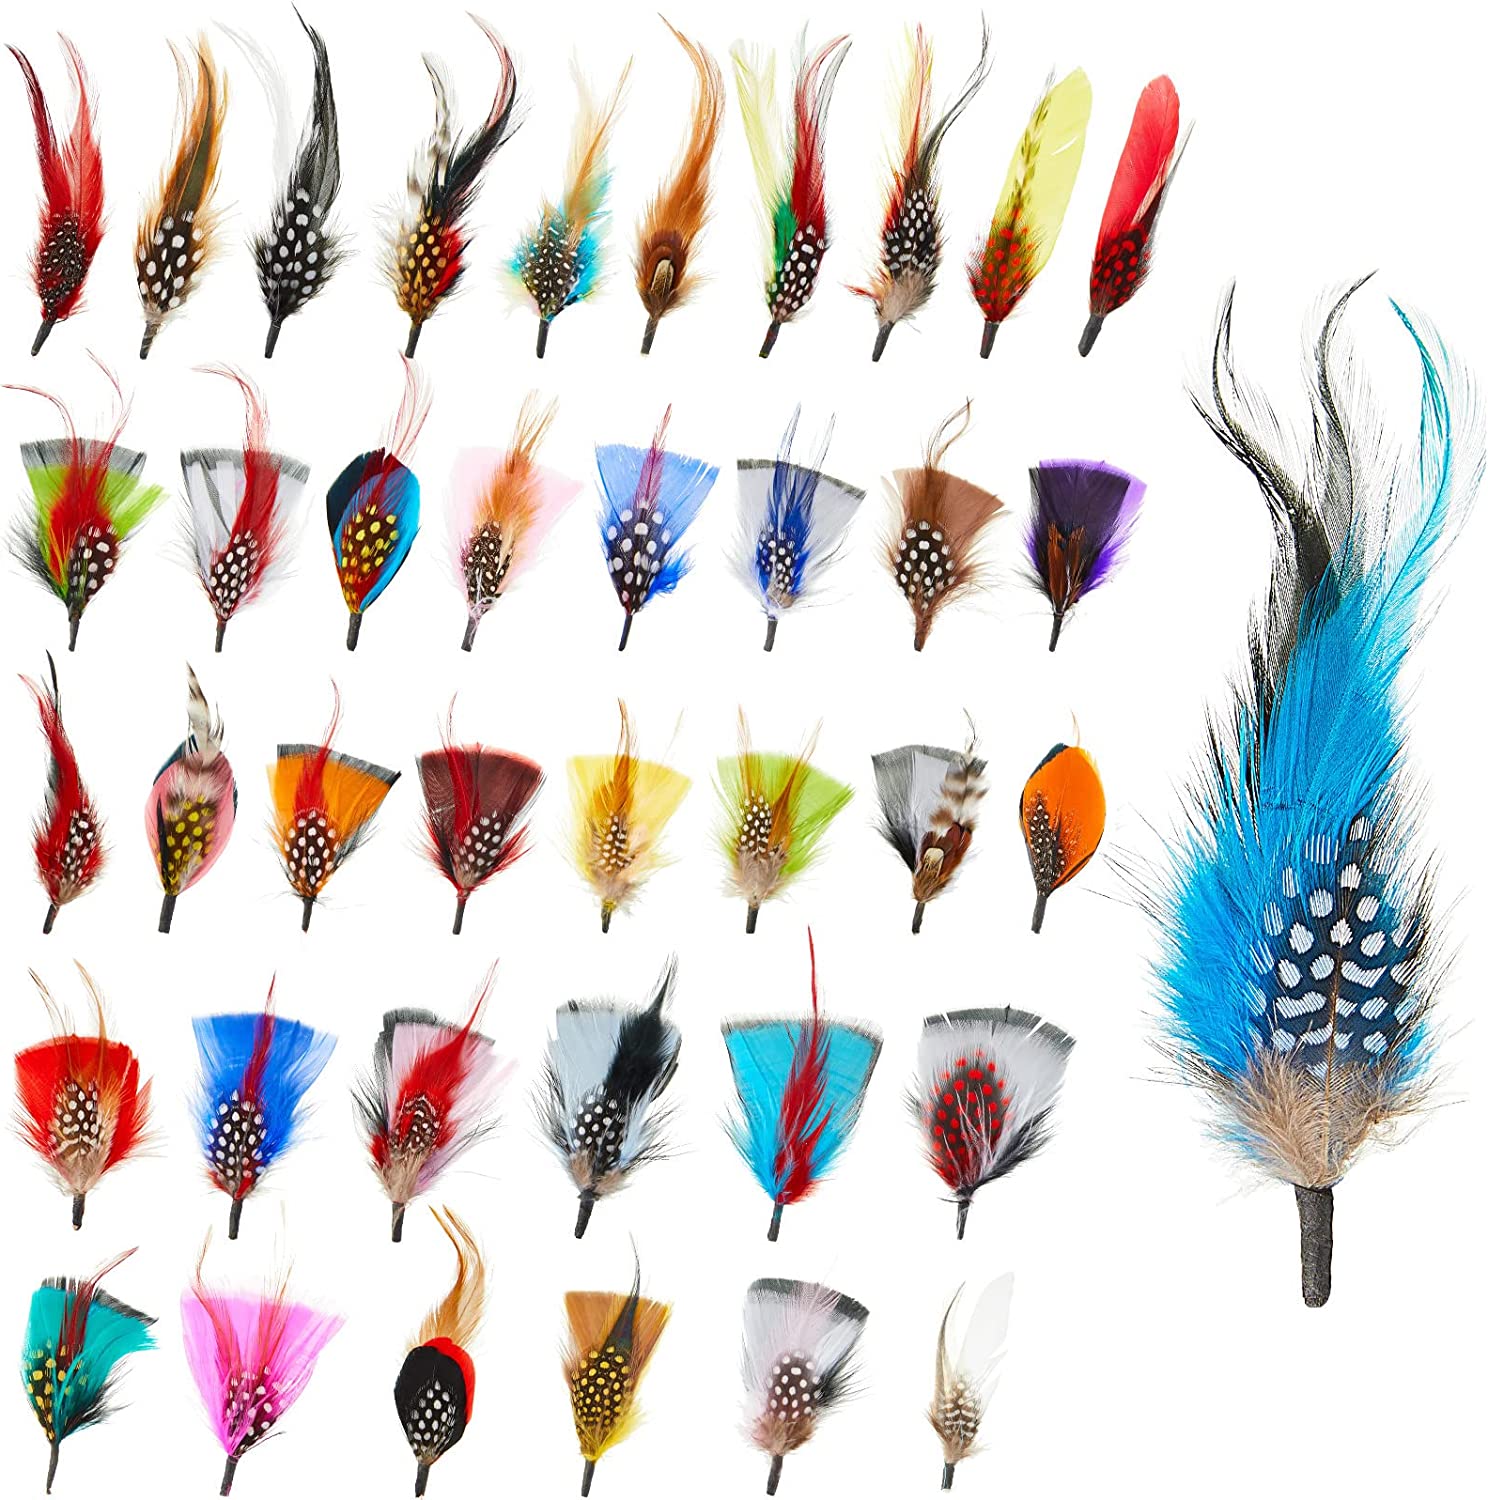  Hat Feathers 10 Pcs, Assorted Natural Feather Packs